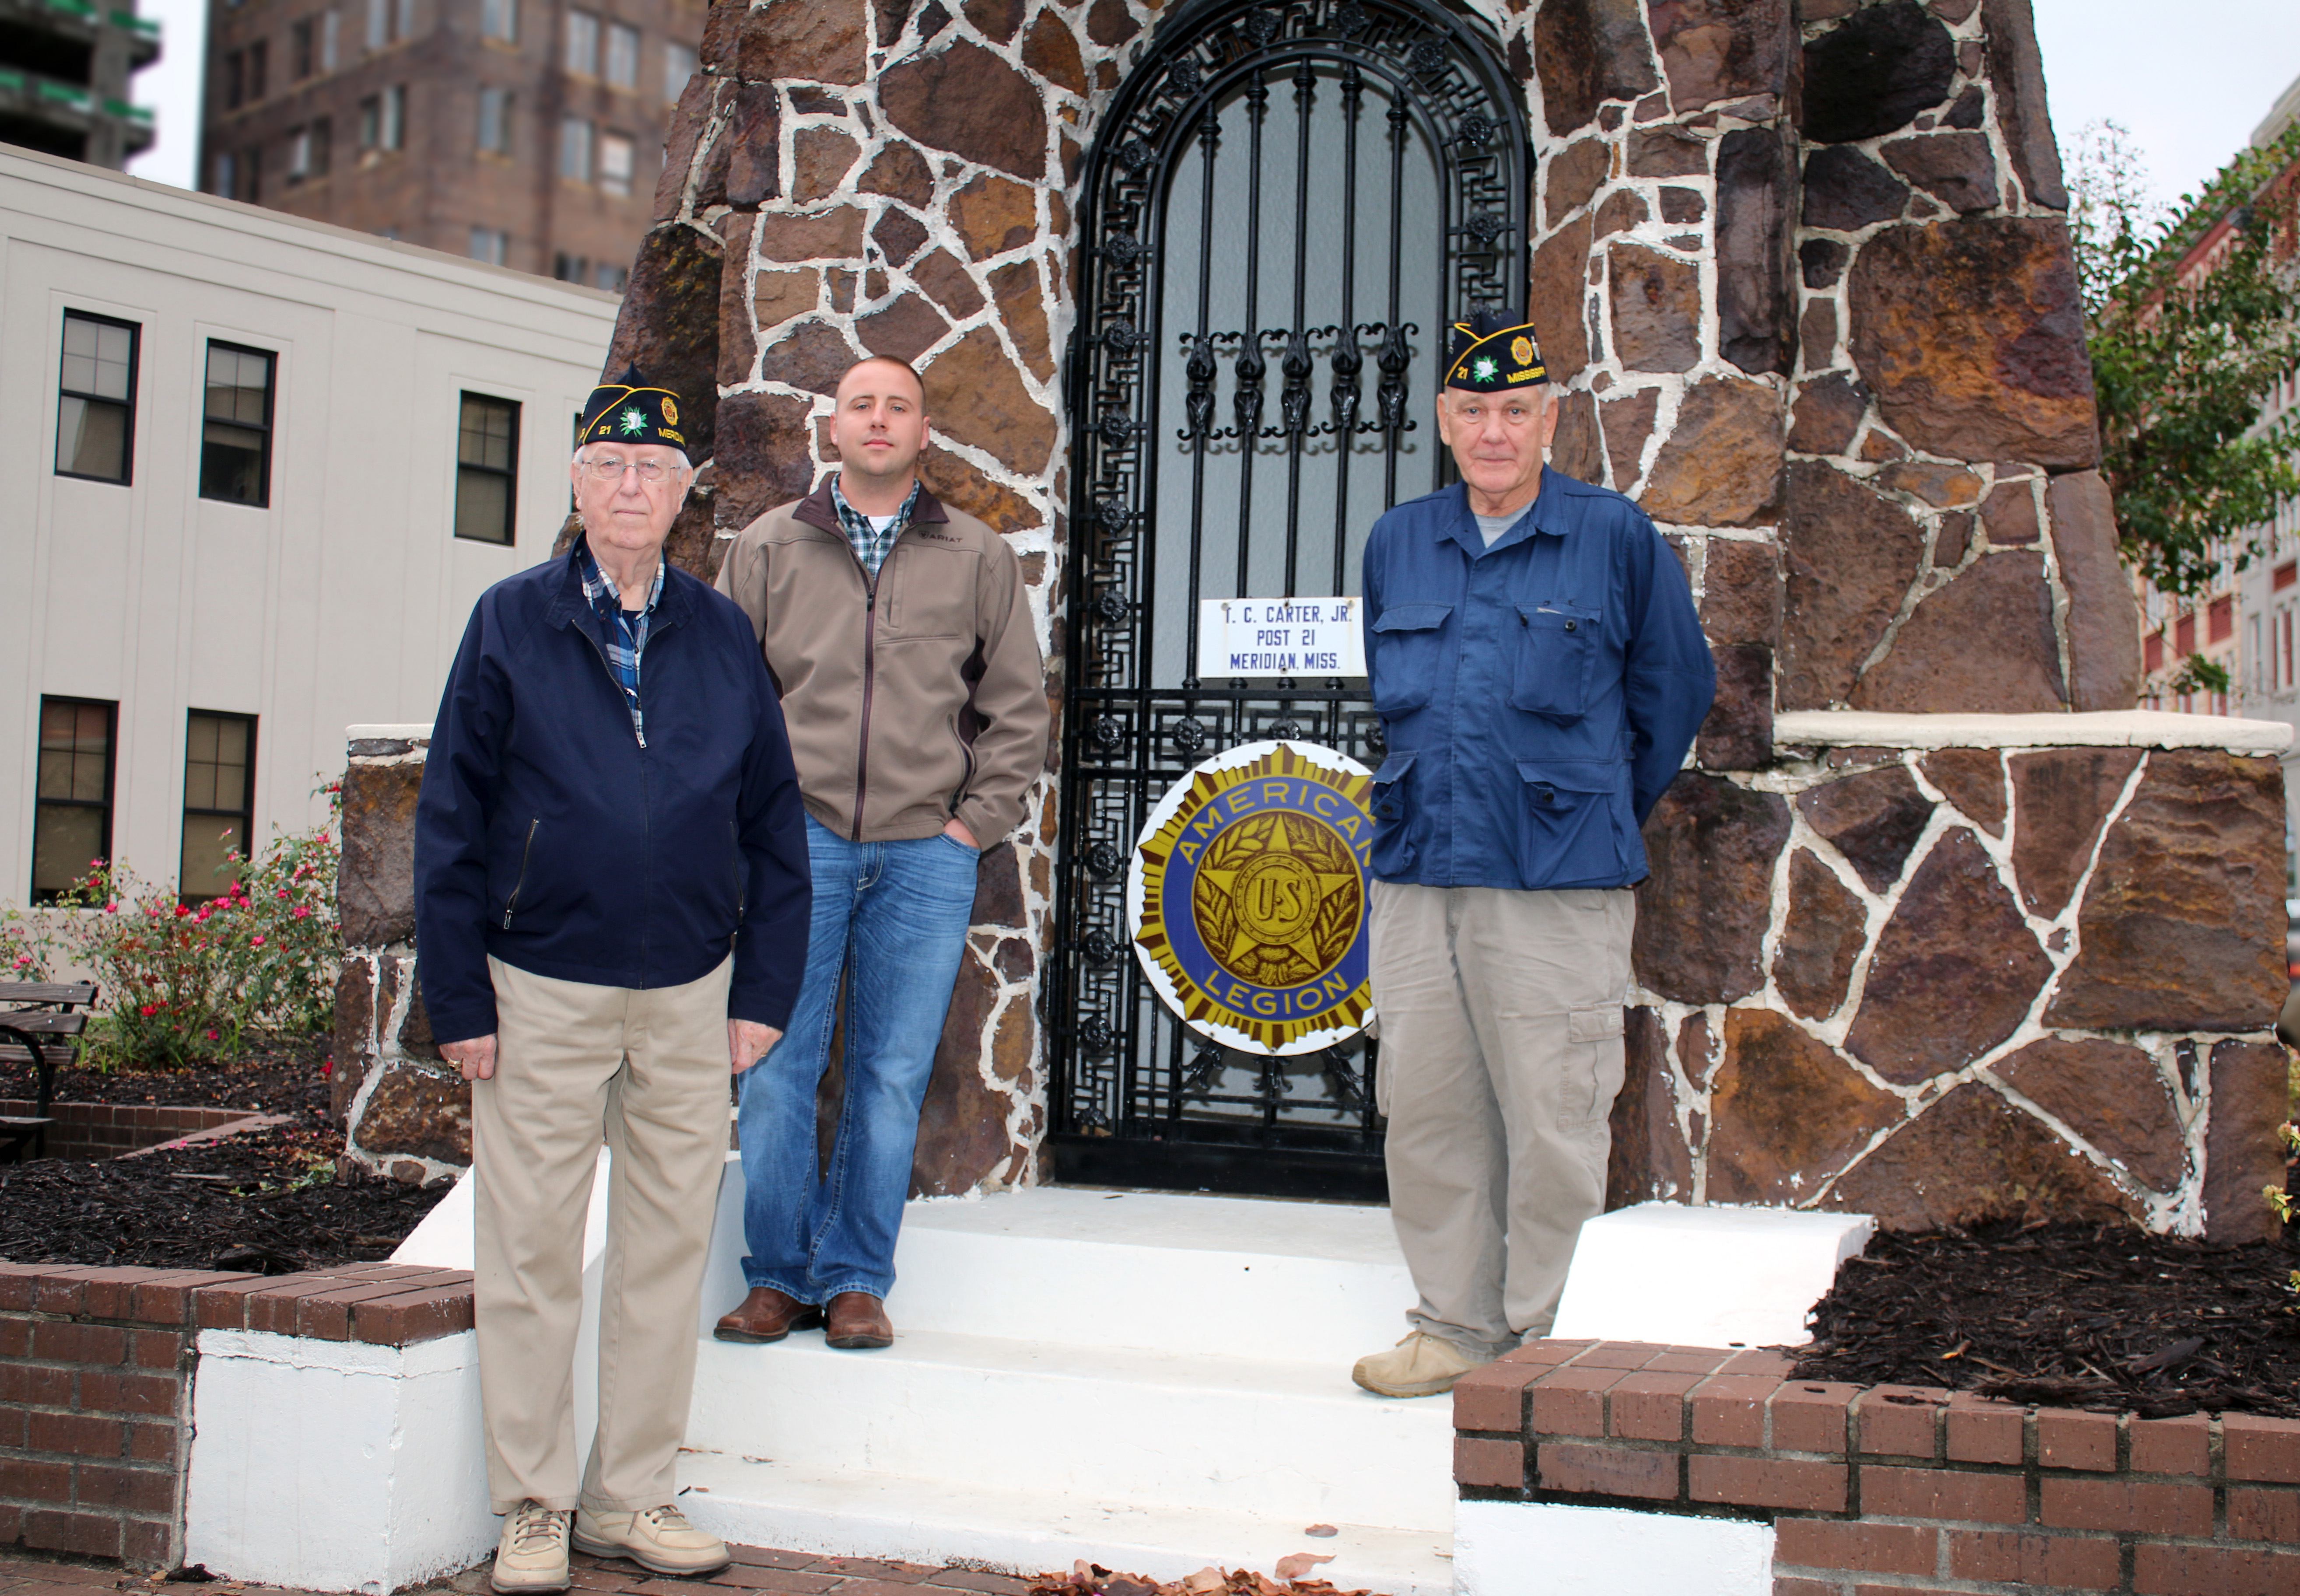 Two members of the American Legion stand with scholarship recipient at the Doughboy monument in downtown Meridian